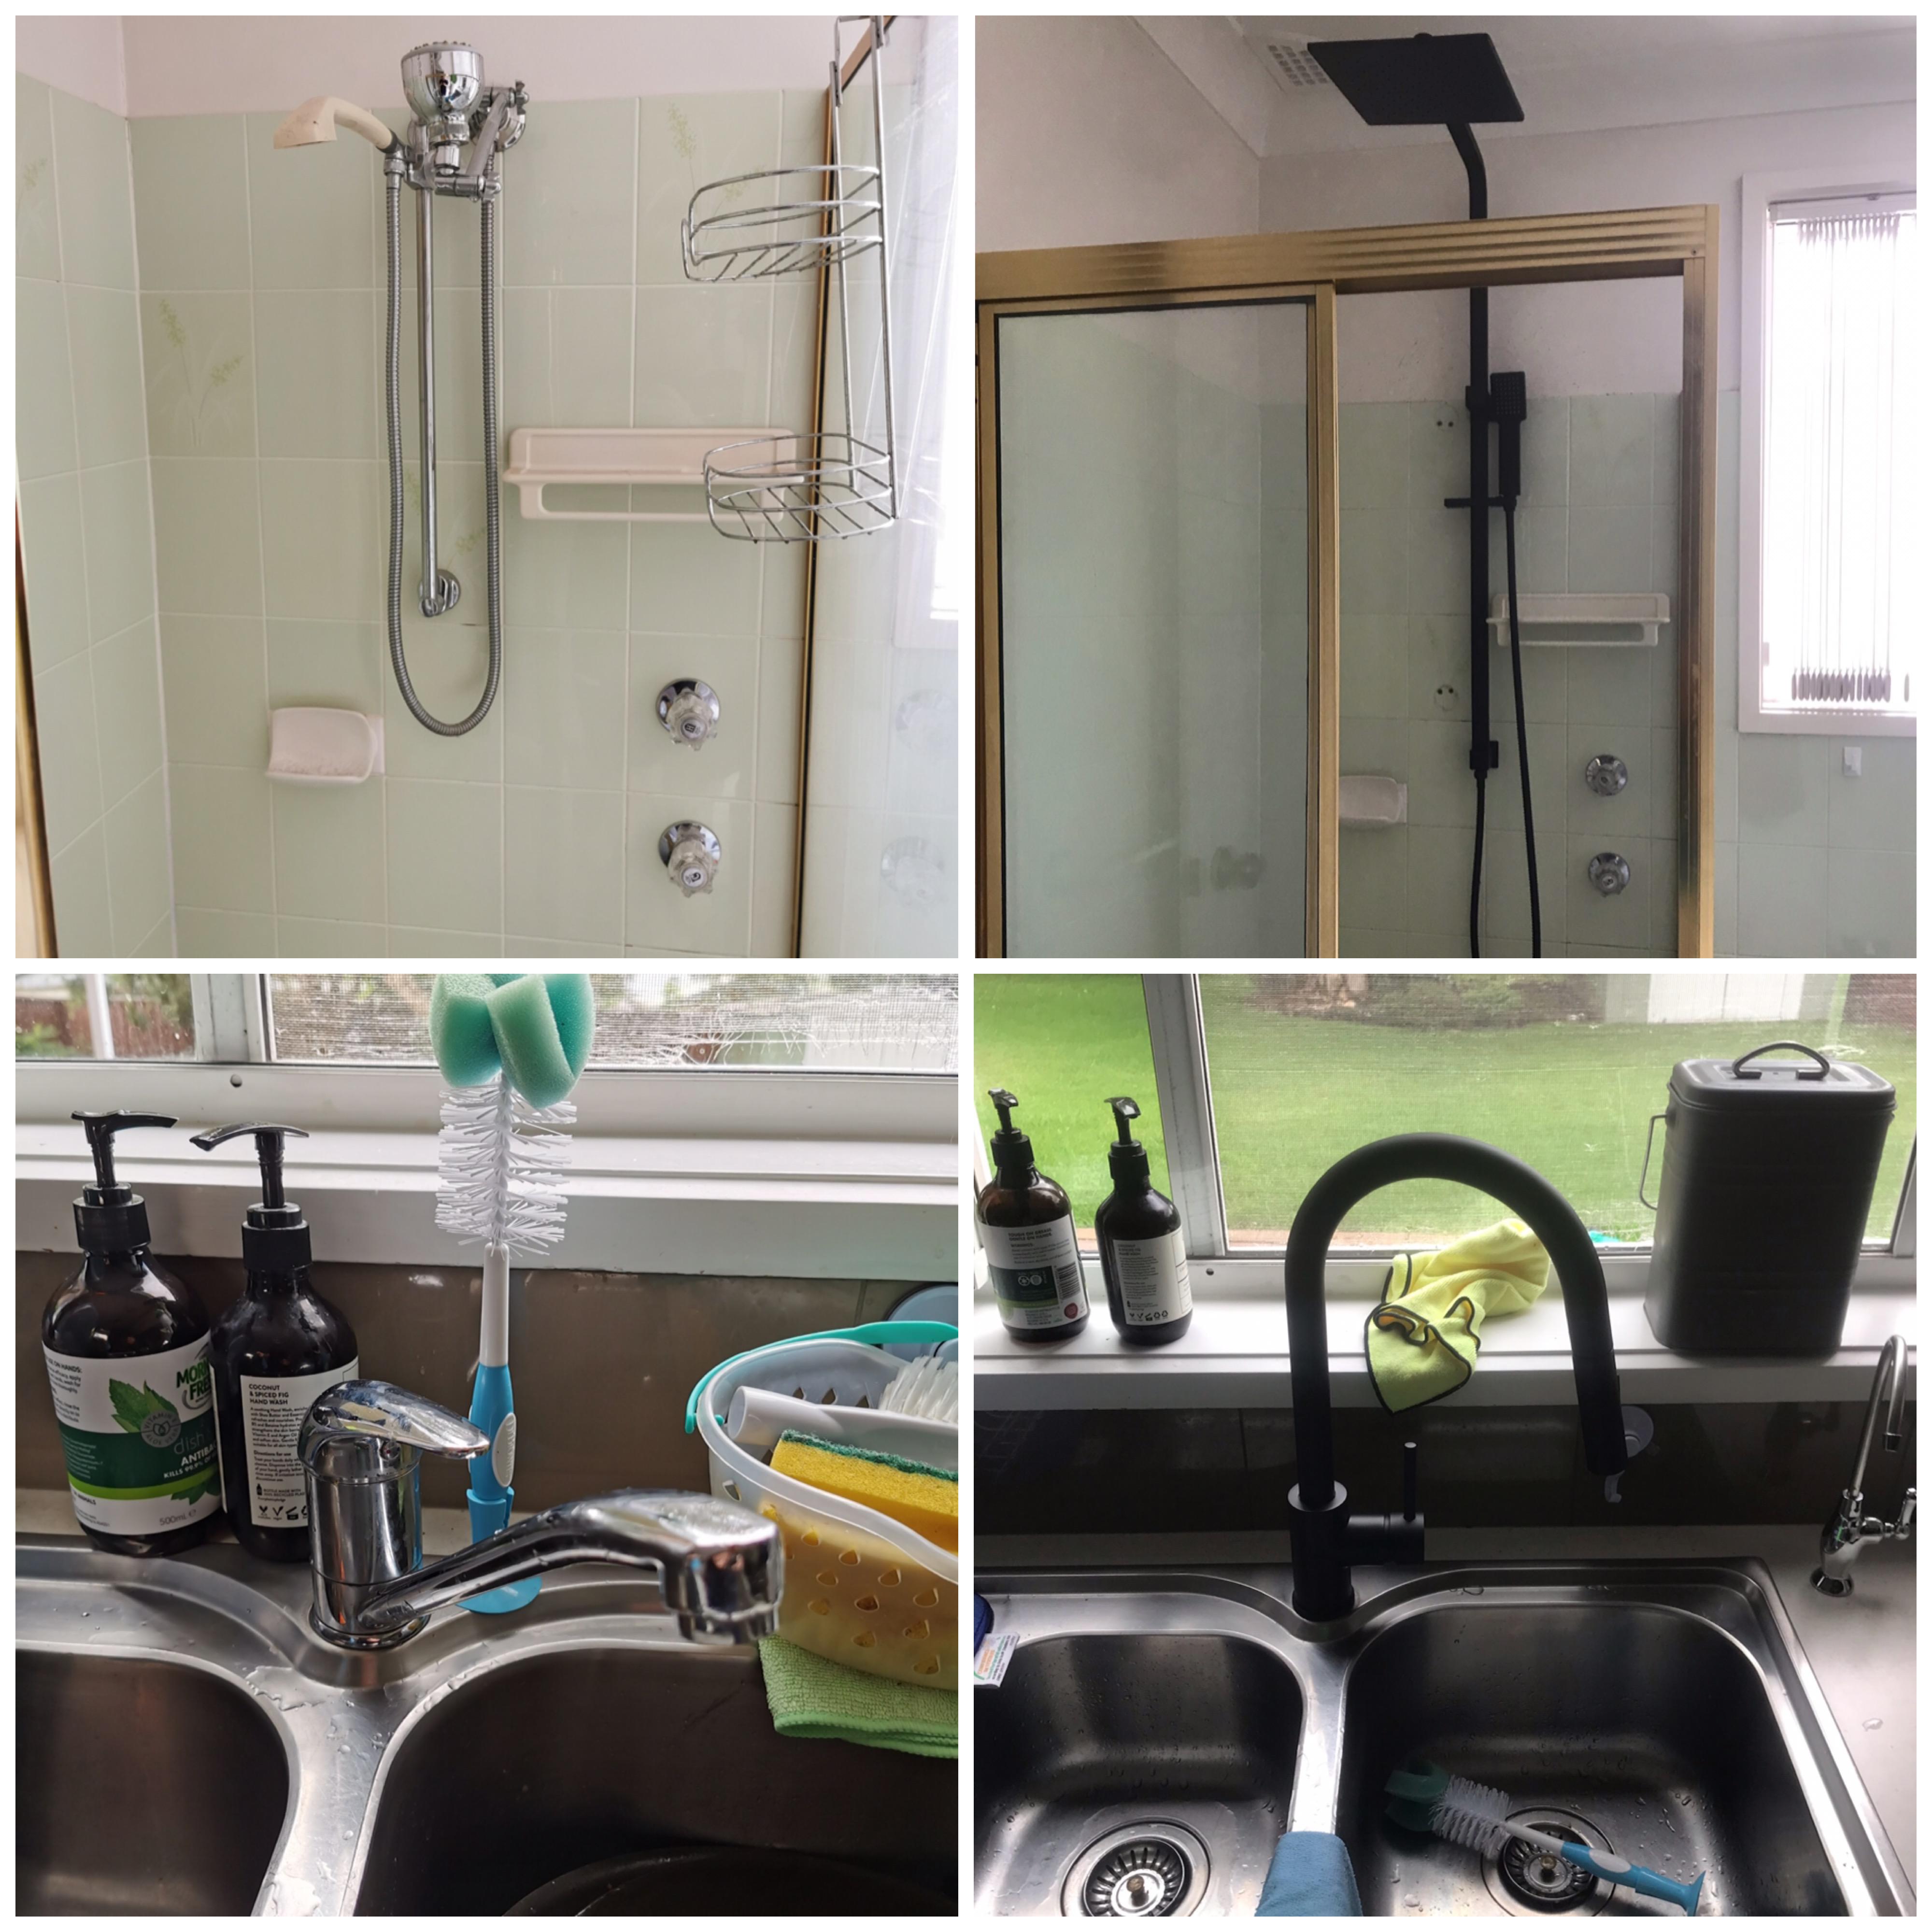 SHOWER & KITCHEN TAPWARE REPLACEMENT CRUCIAL Plumbing Services Pty Ltd Seven Hills (02) 8041 4999